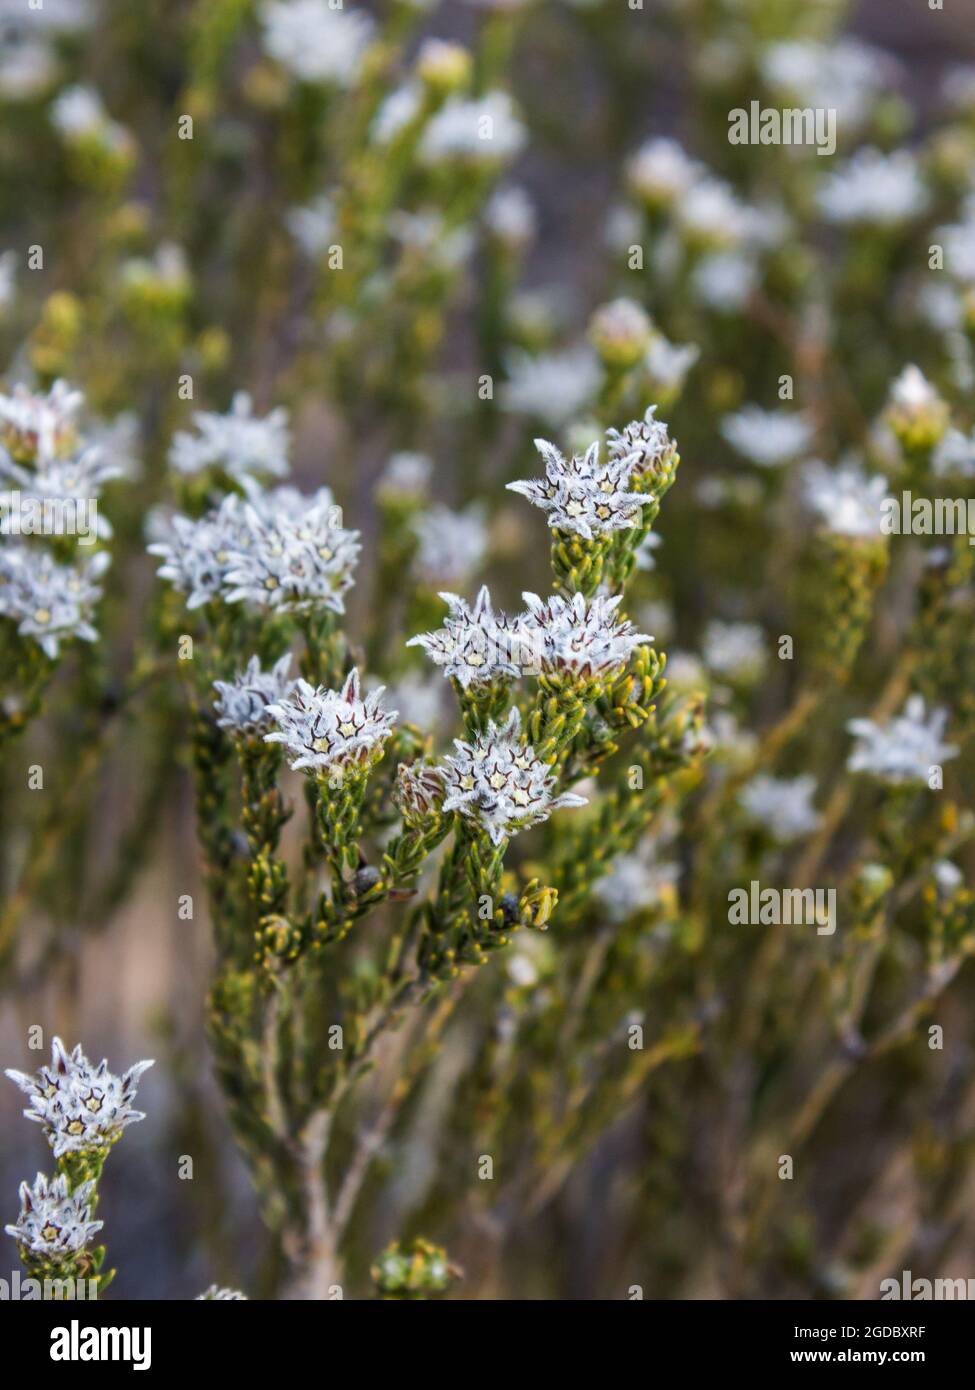 The strange hairy flowers of the Trichocephalus stipularis, commonly known as a Dogface, growing wild in the Cederberg Mountains, South Africa. Stock Photo